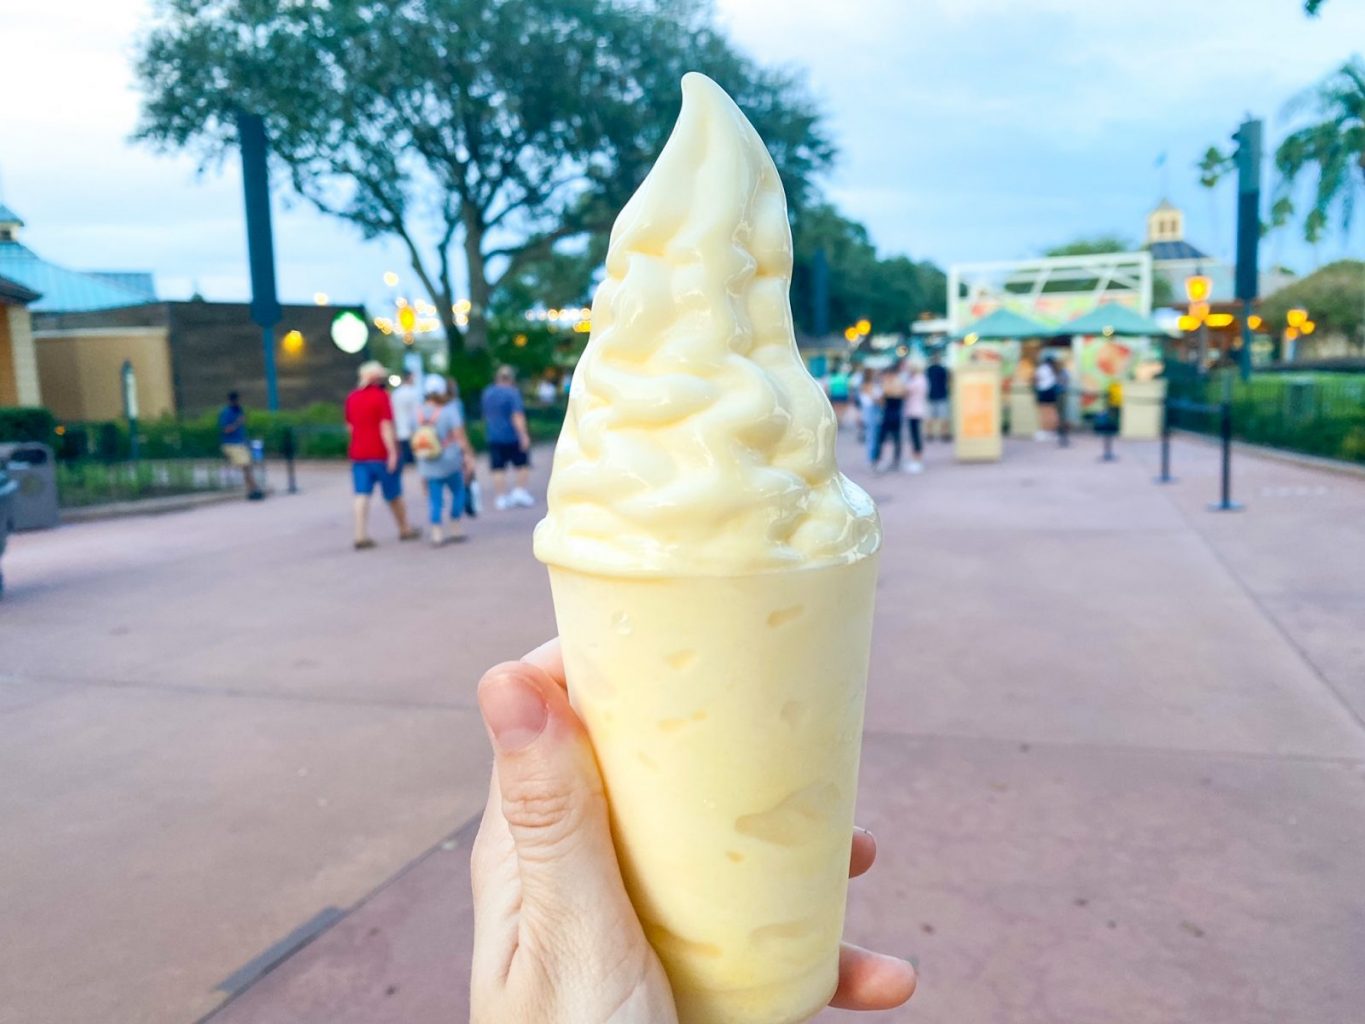 A picture of the classic Dole Whip at Disney - the pineapple dole whip